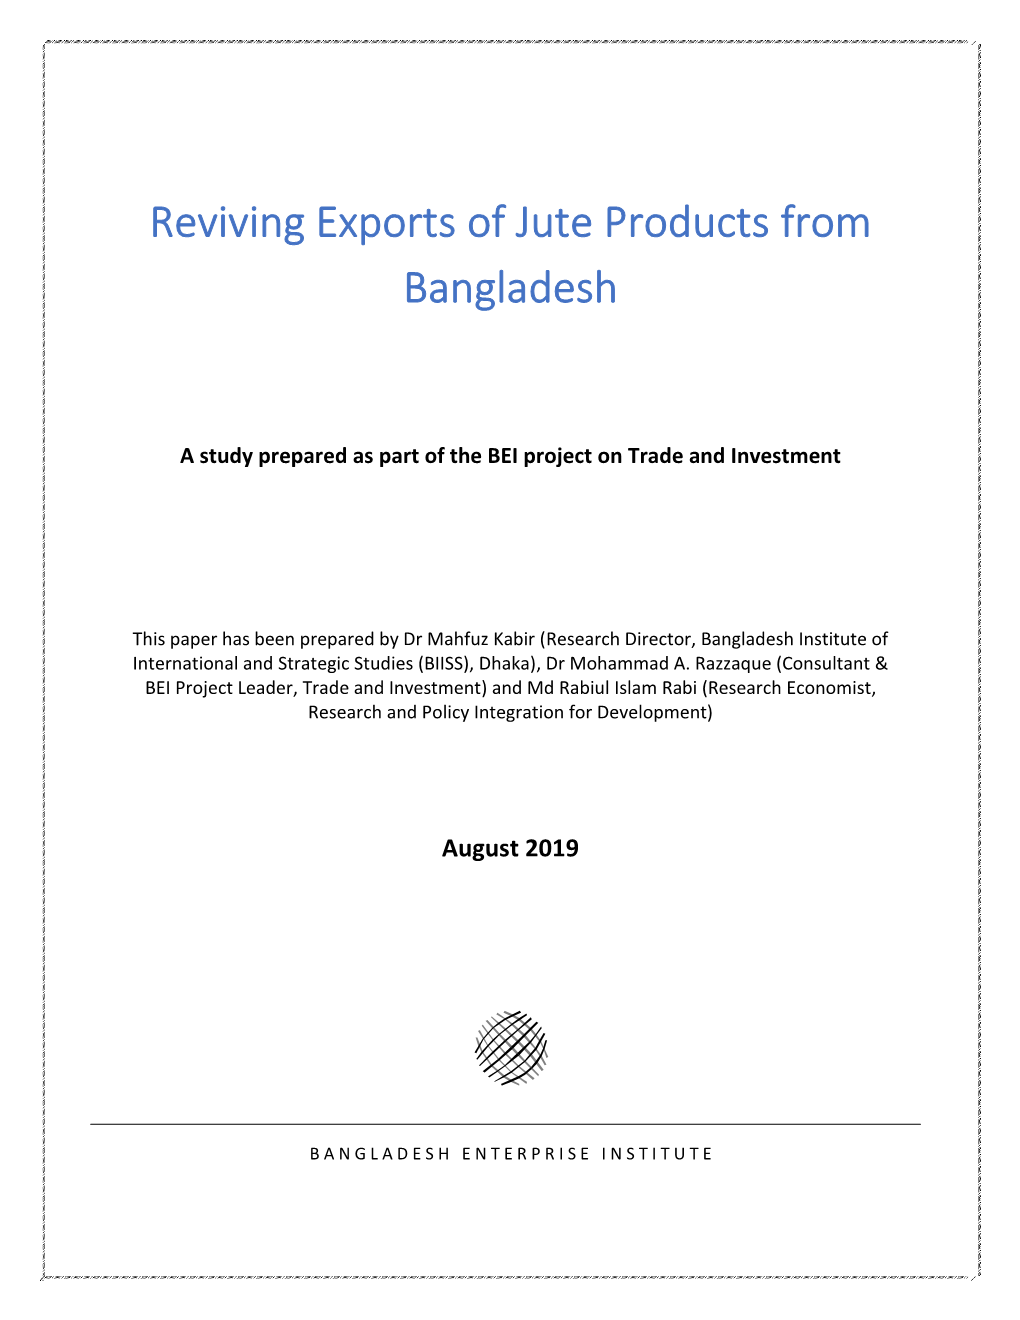 Reviving Exports of Jute Products from Bangladesh